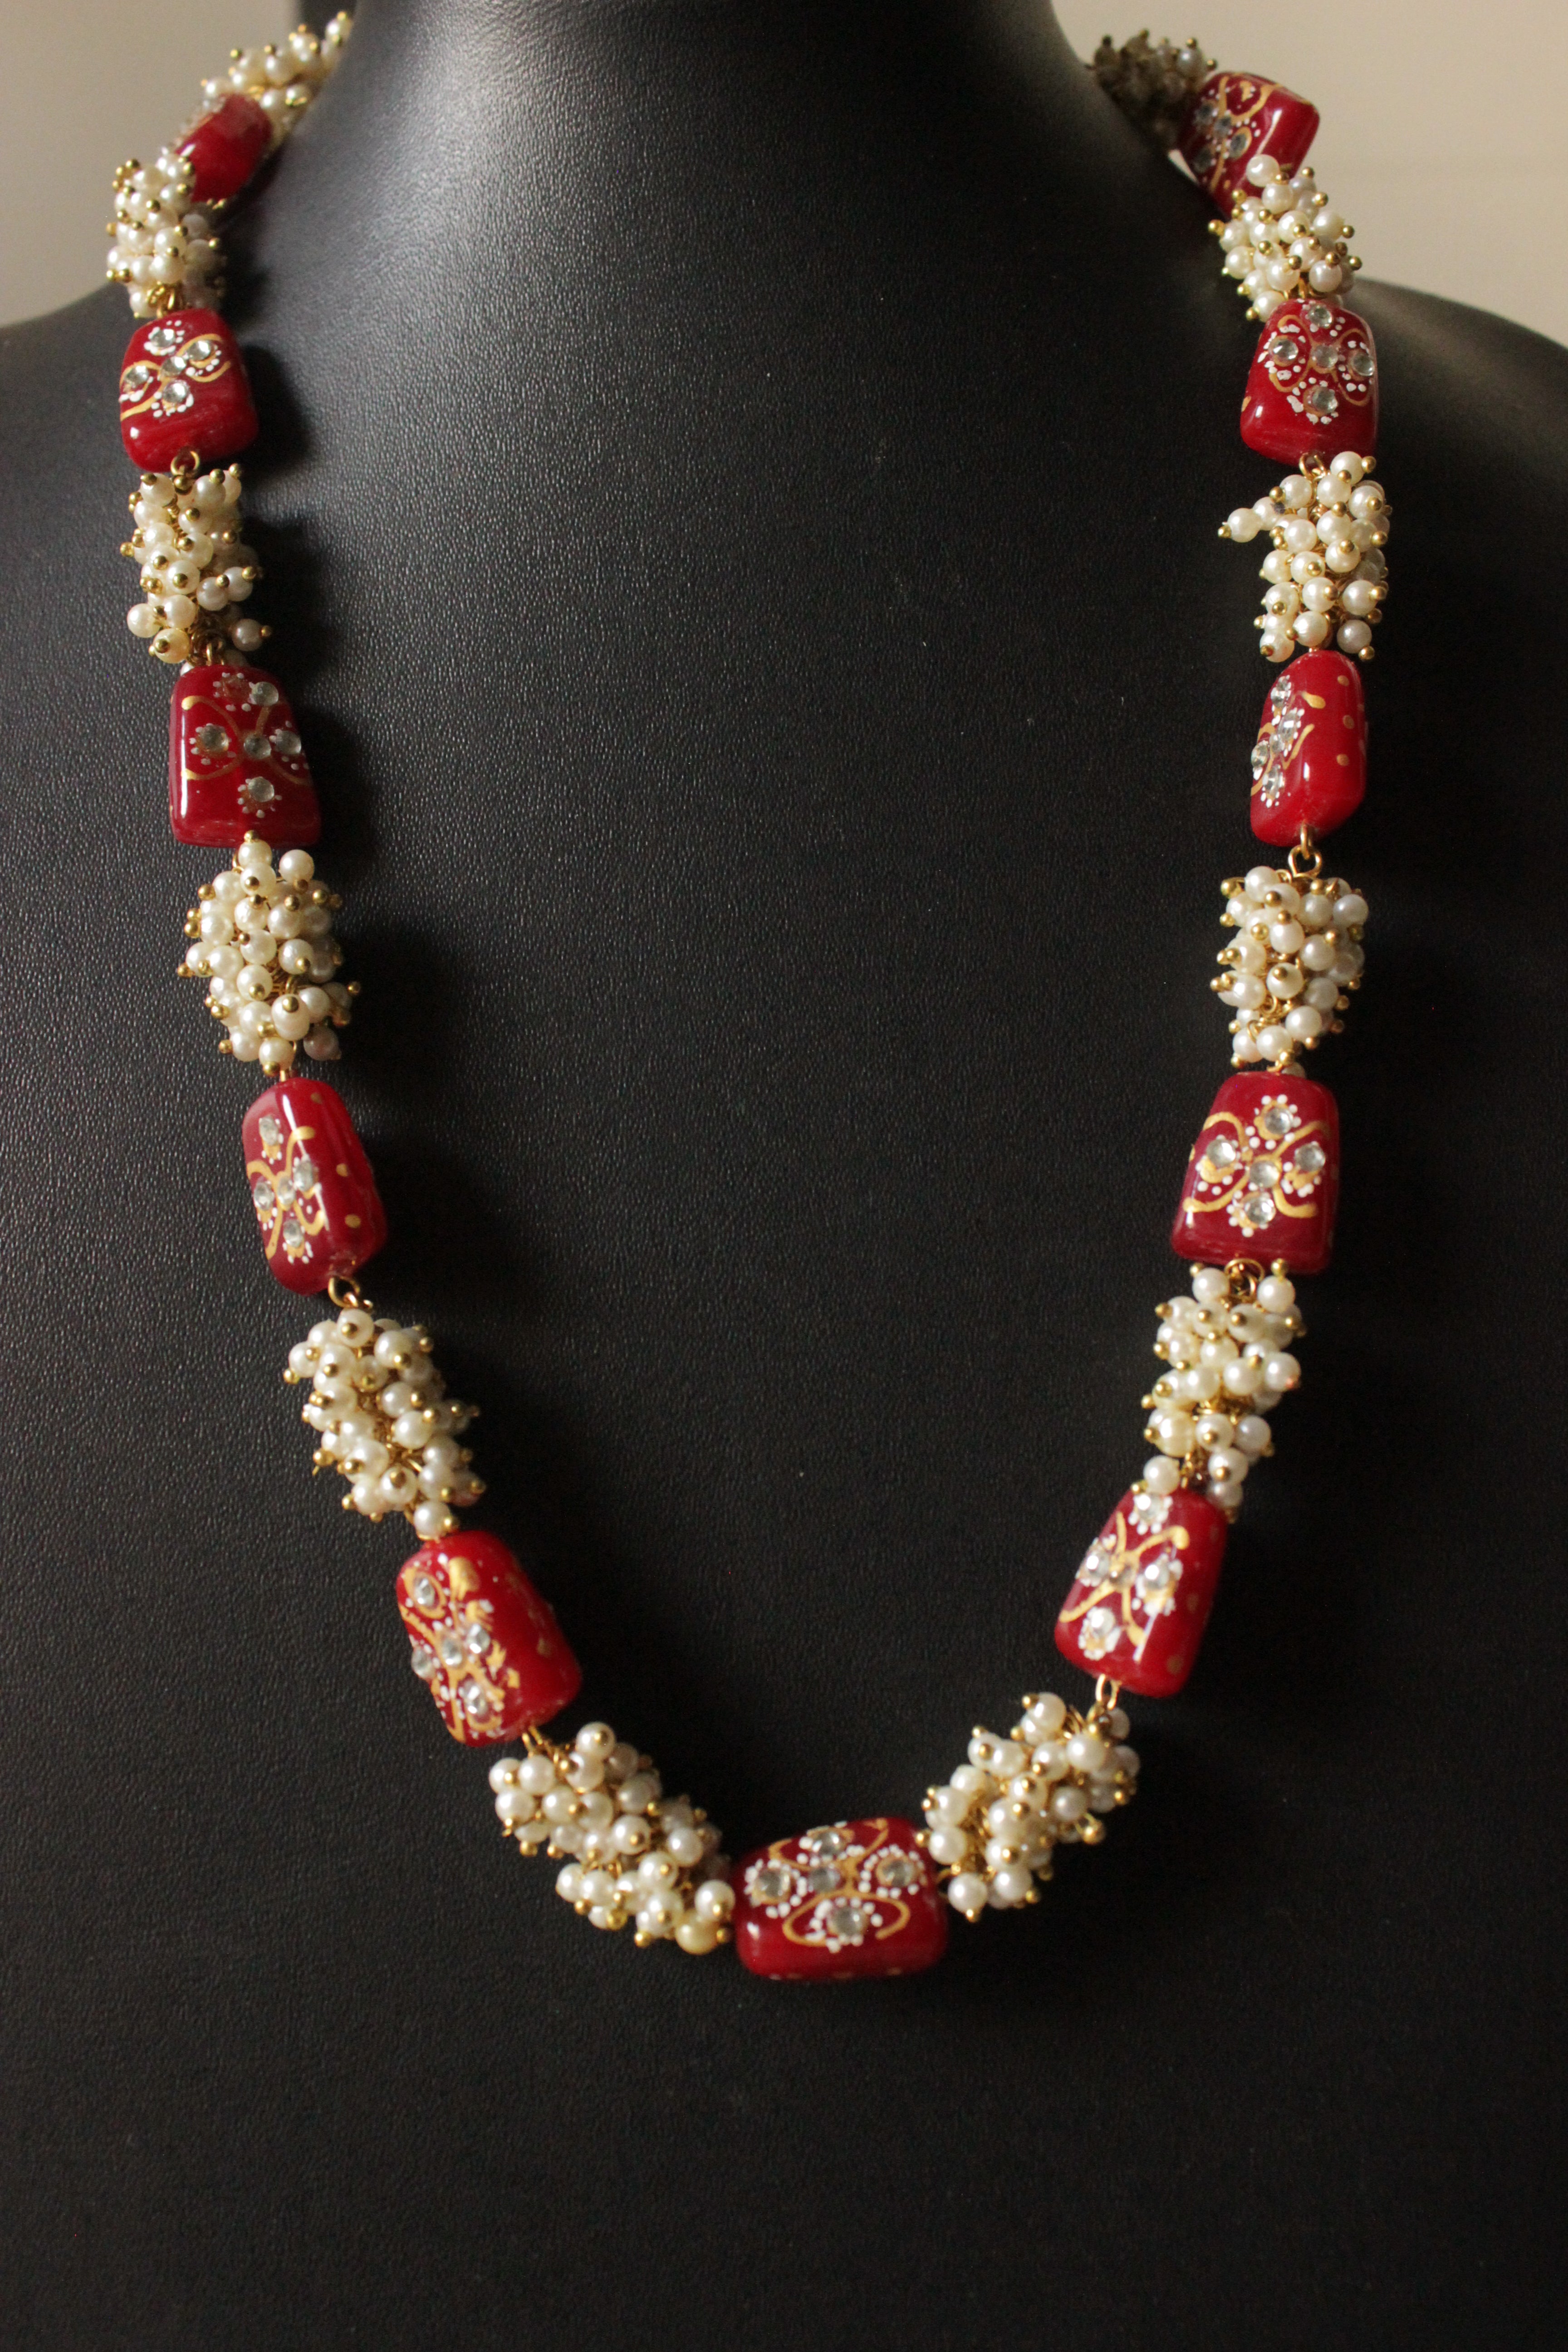 Meenakari Work Red Glass Beads and White Beads Adjustable Length Necklace Set